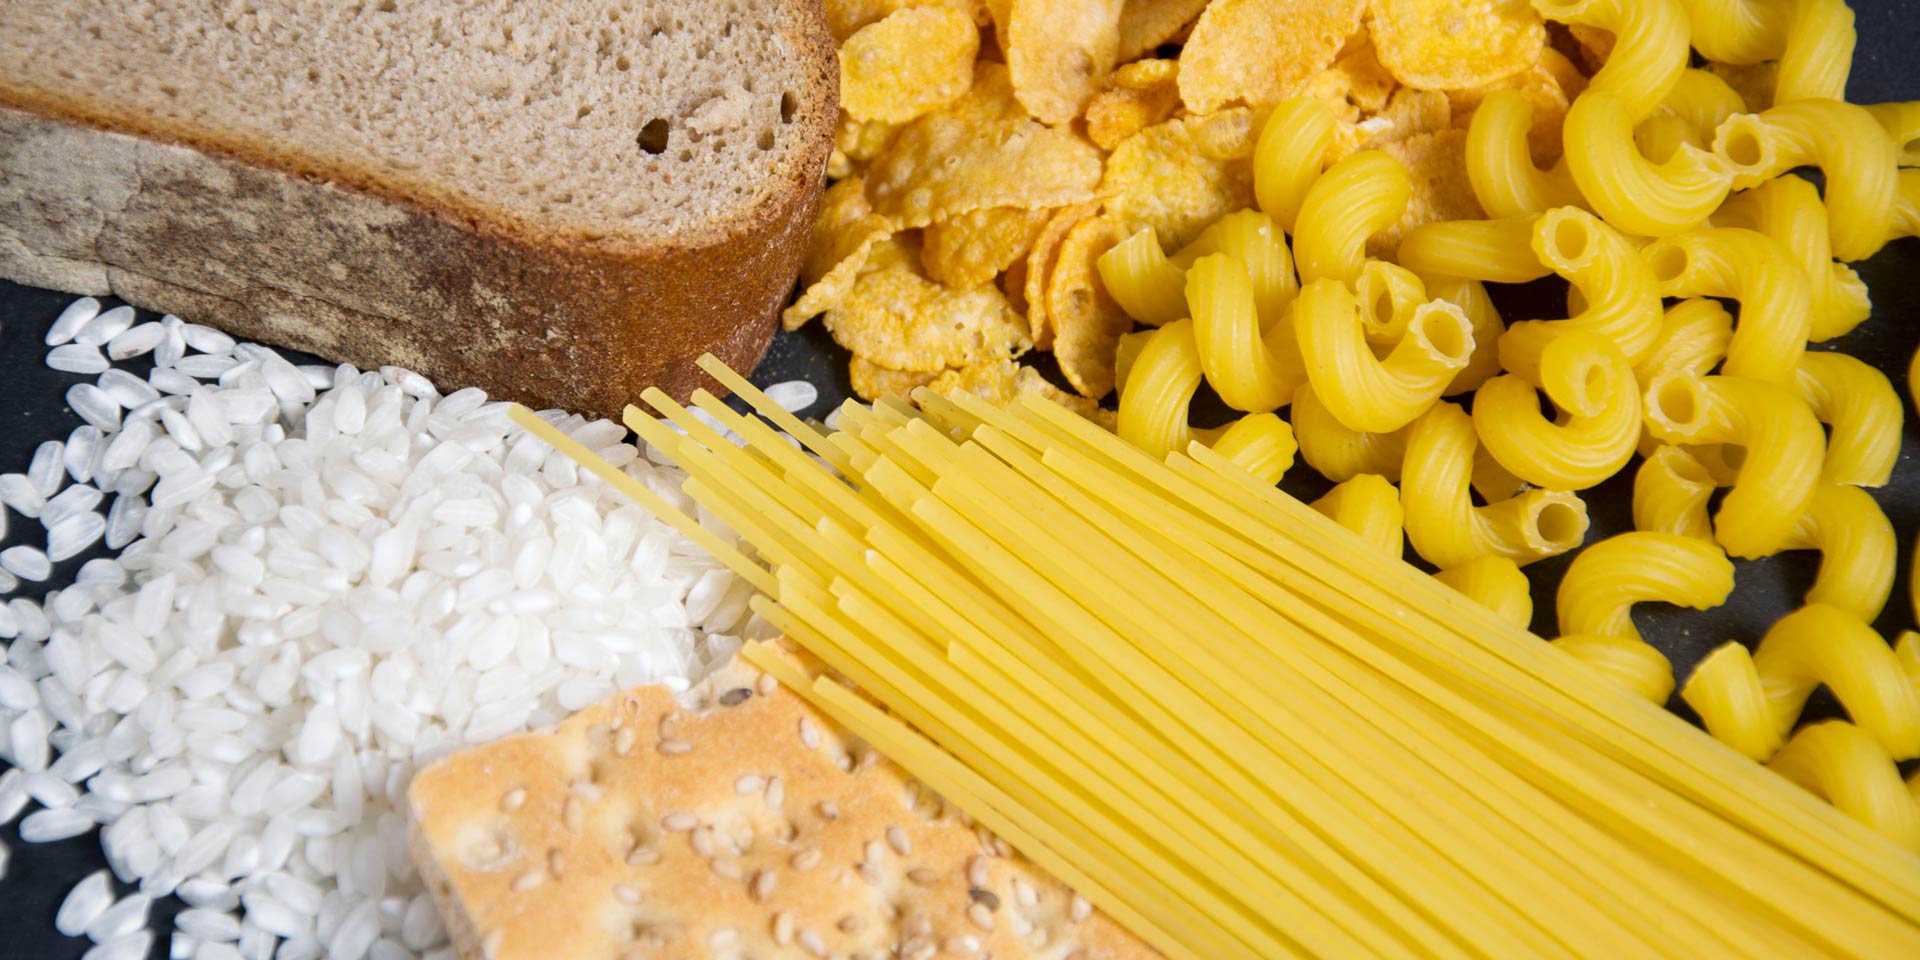 Low-carbohydrate diets may shorten lifespan